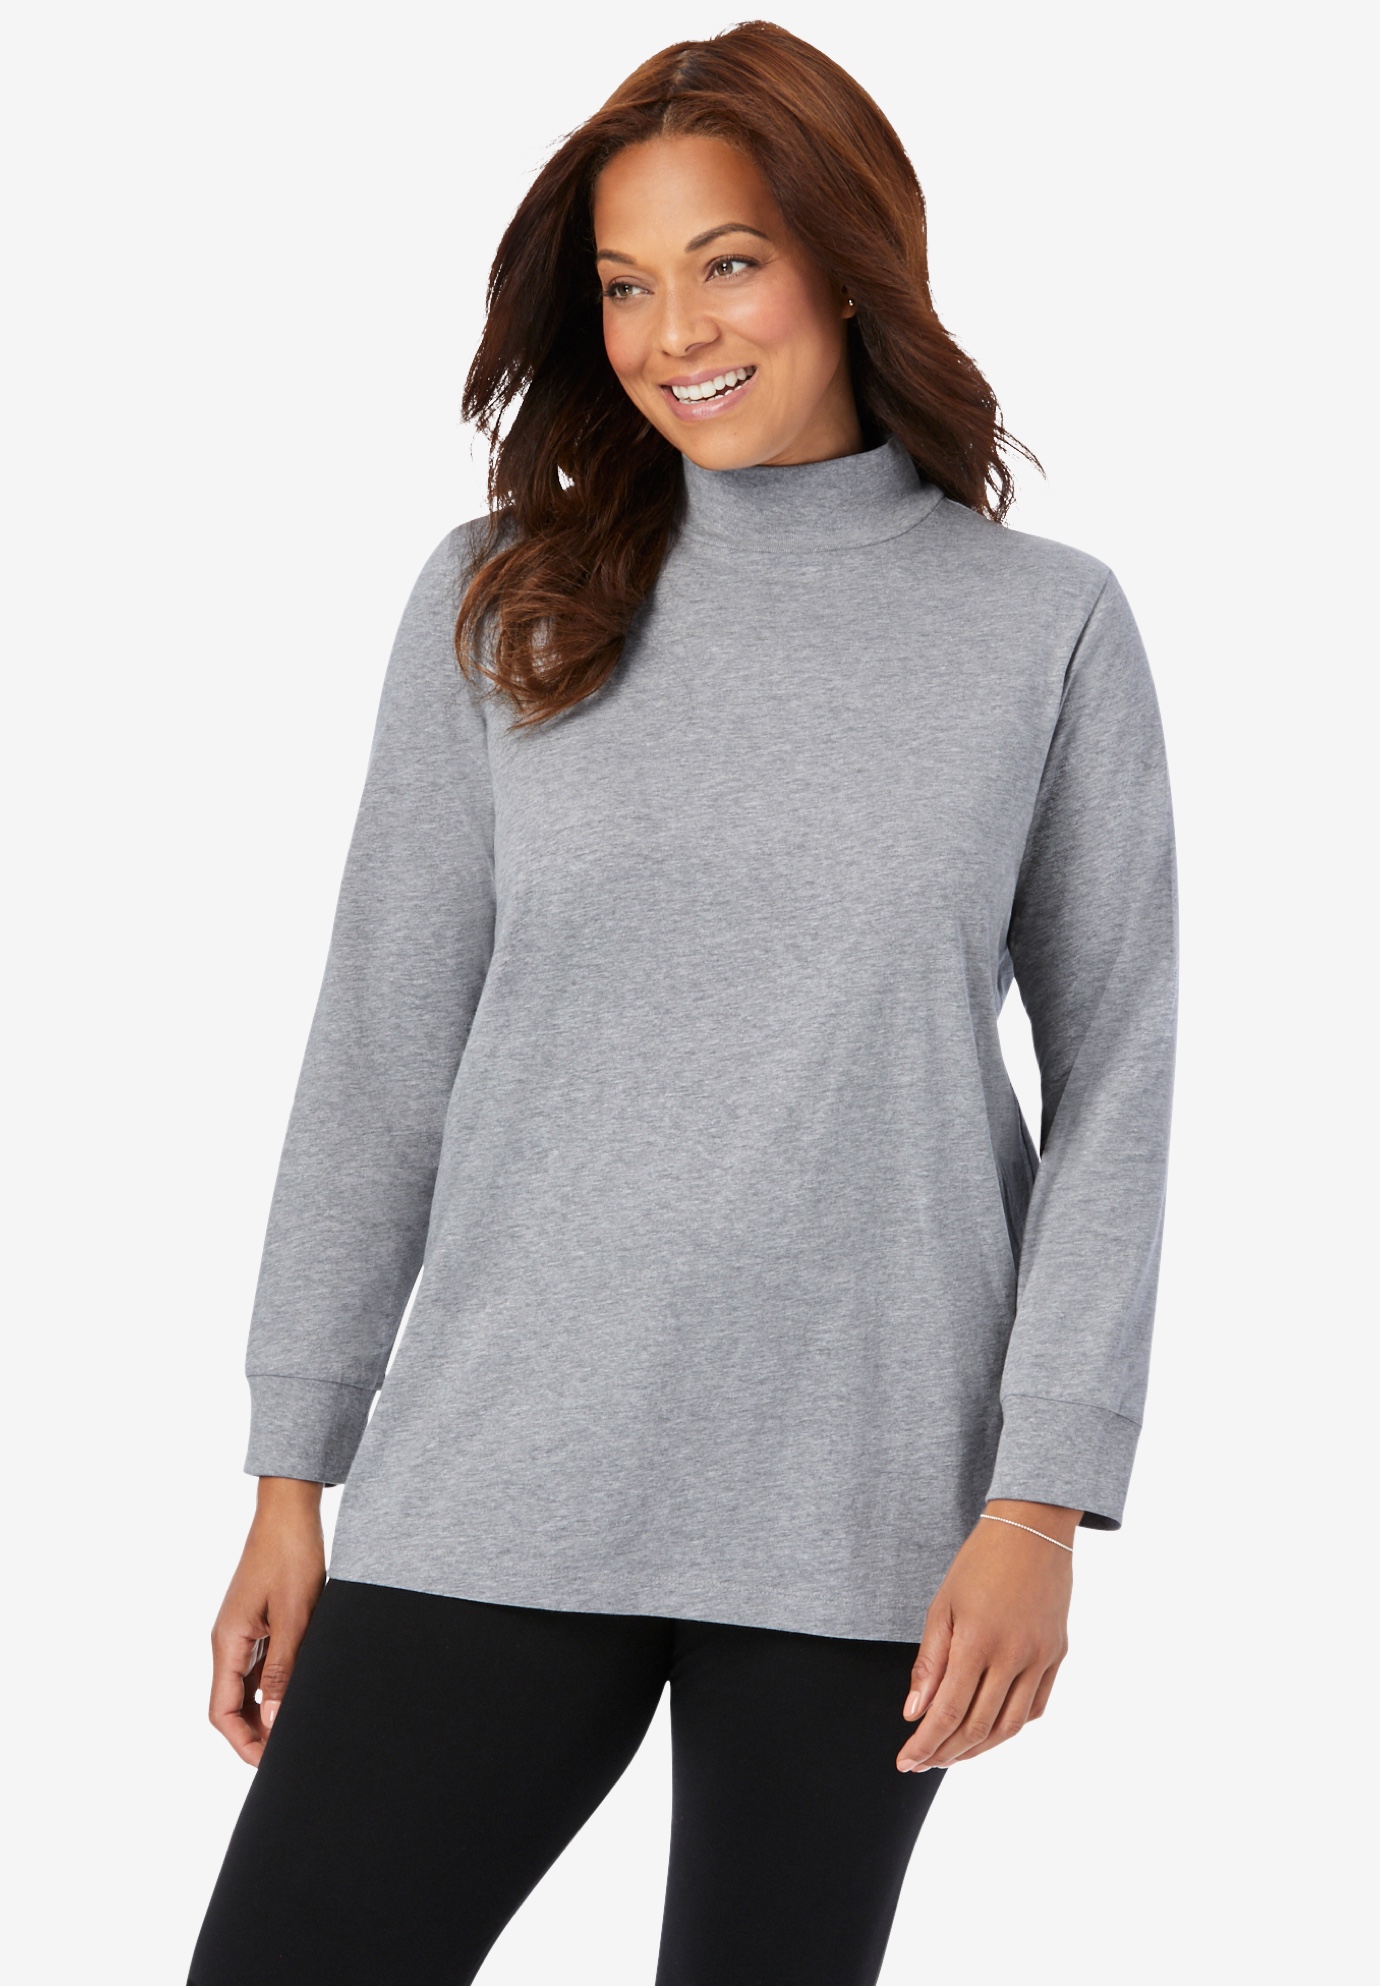 Perfect Long Sleeve Mock Turtleneck| Plus Size Tops | Woman Within